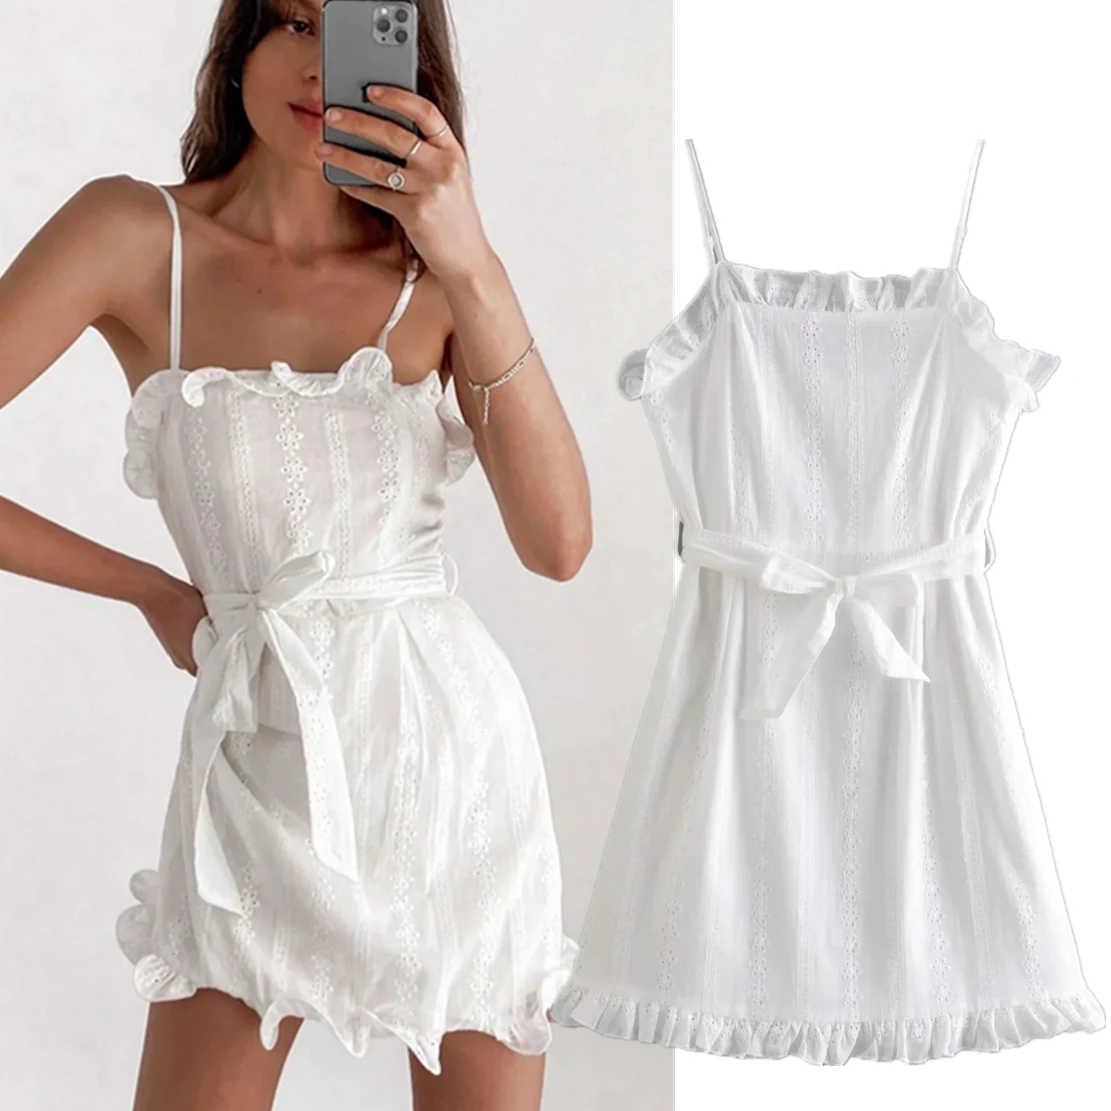 

Elmsk French Style Hollow Out Flower Embroidery Sexy Cotton Indie Folk Vintage Spaghetti Strapless Sexy Mini Dress Women